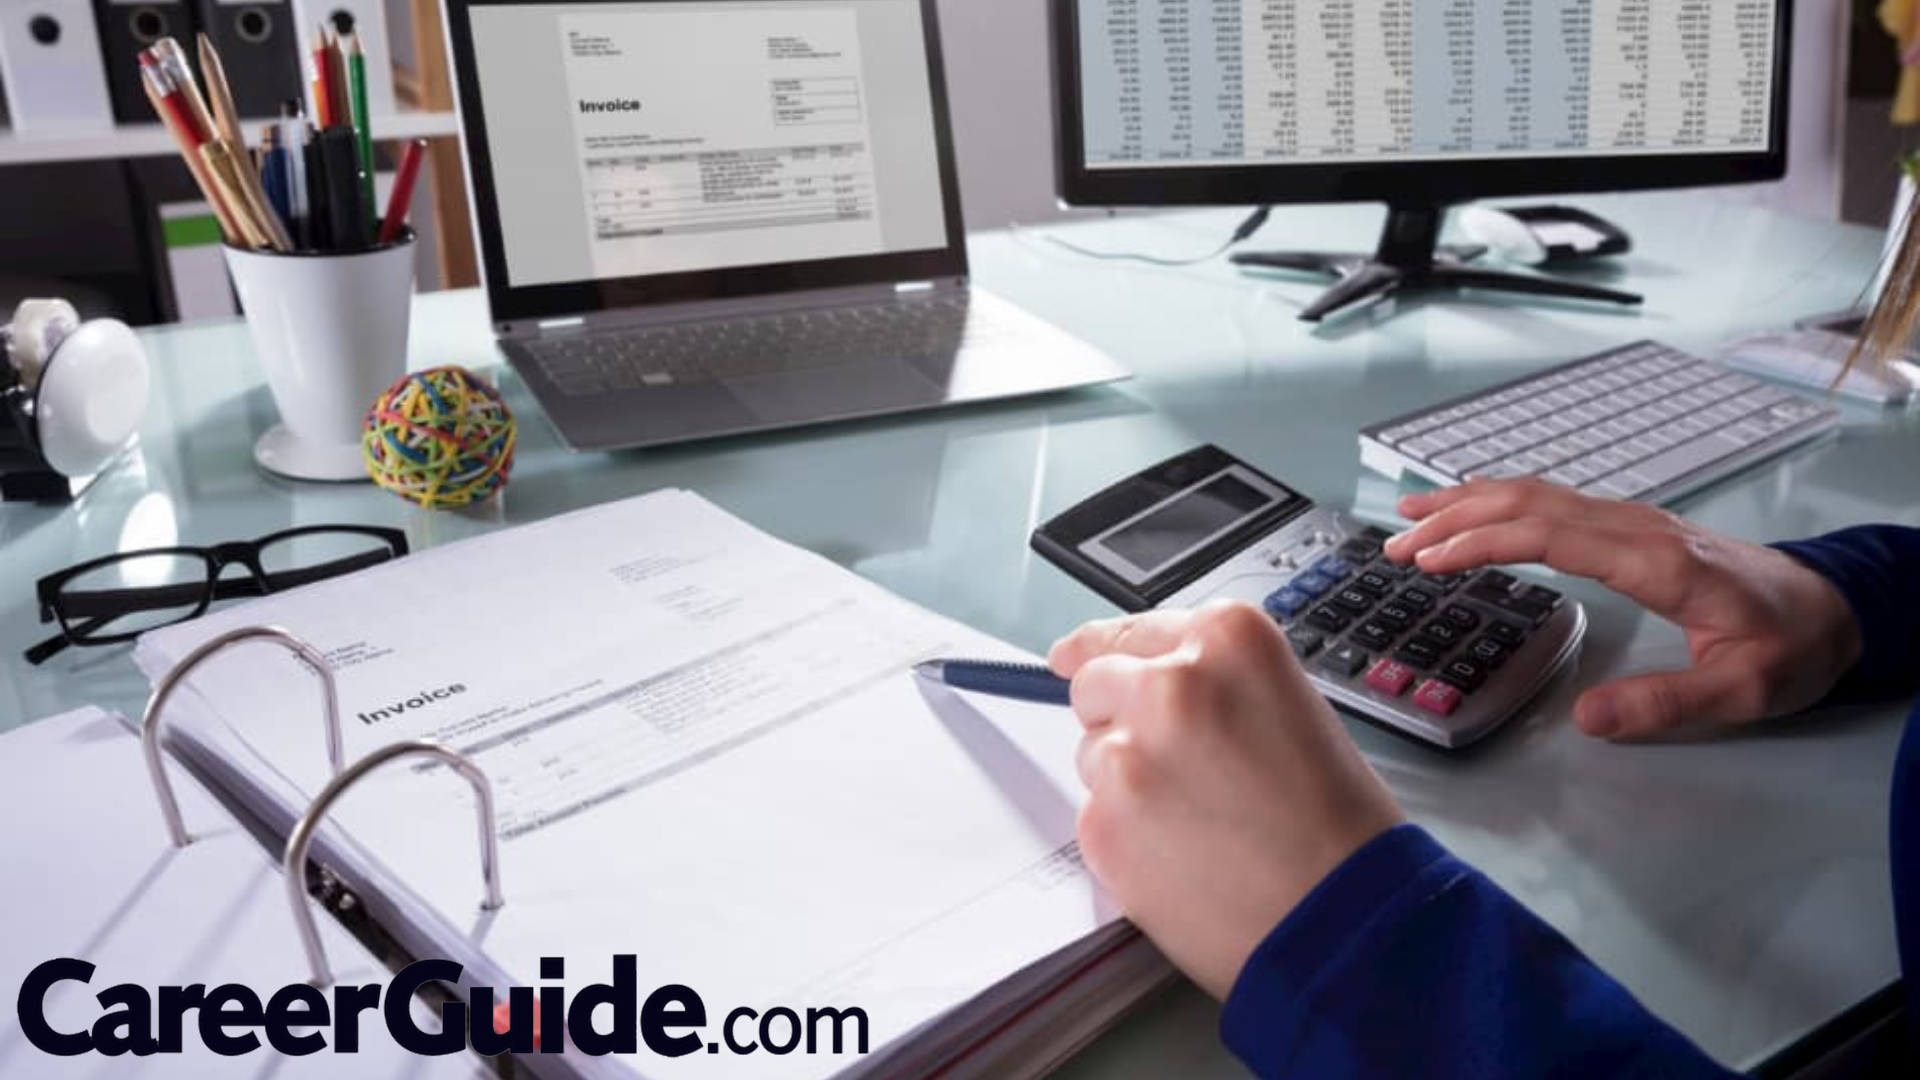 Learn Accounting Skills With Dedication